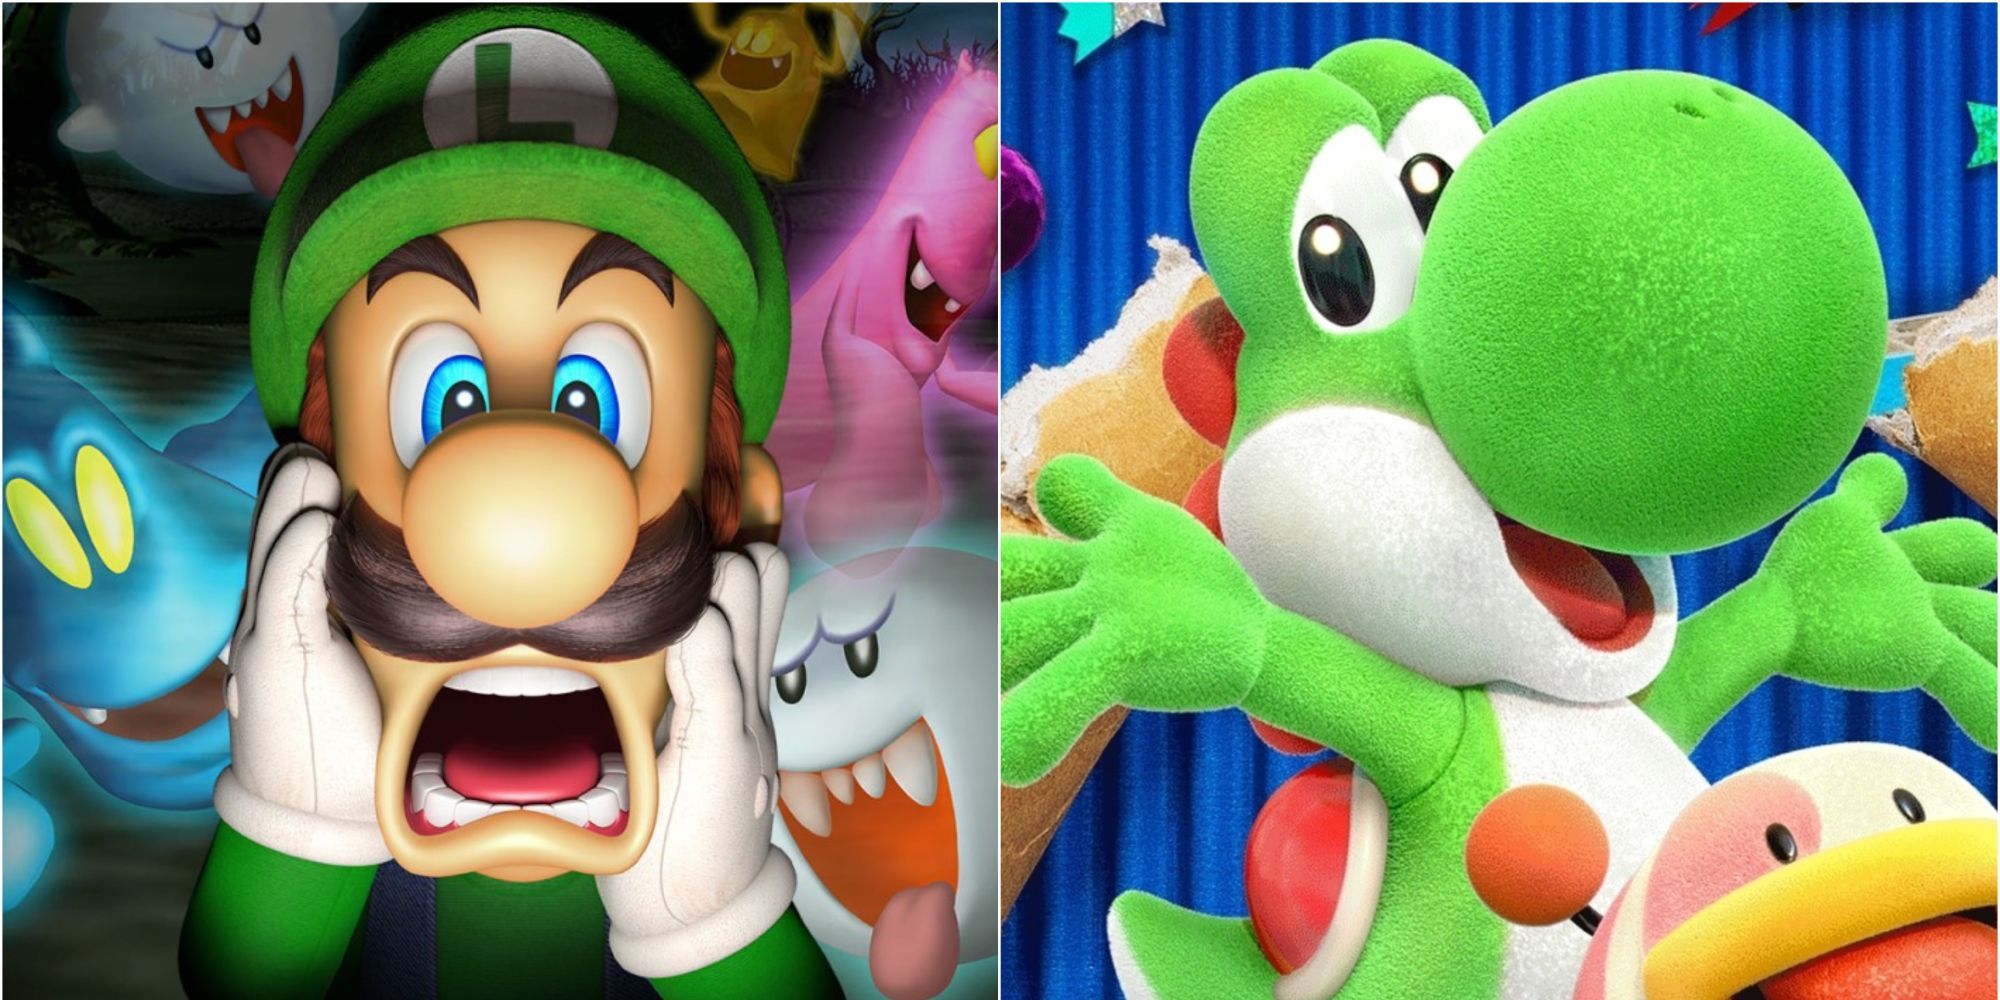 Luigi screaming as ghosts loom behind him, beside Yoshi with his arms thrown out as he smiles